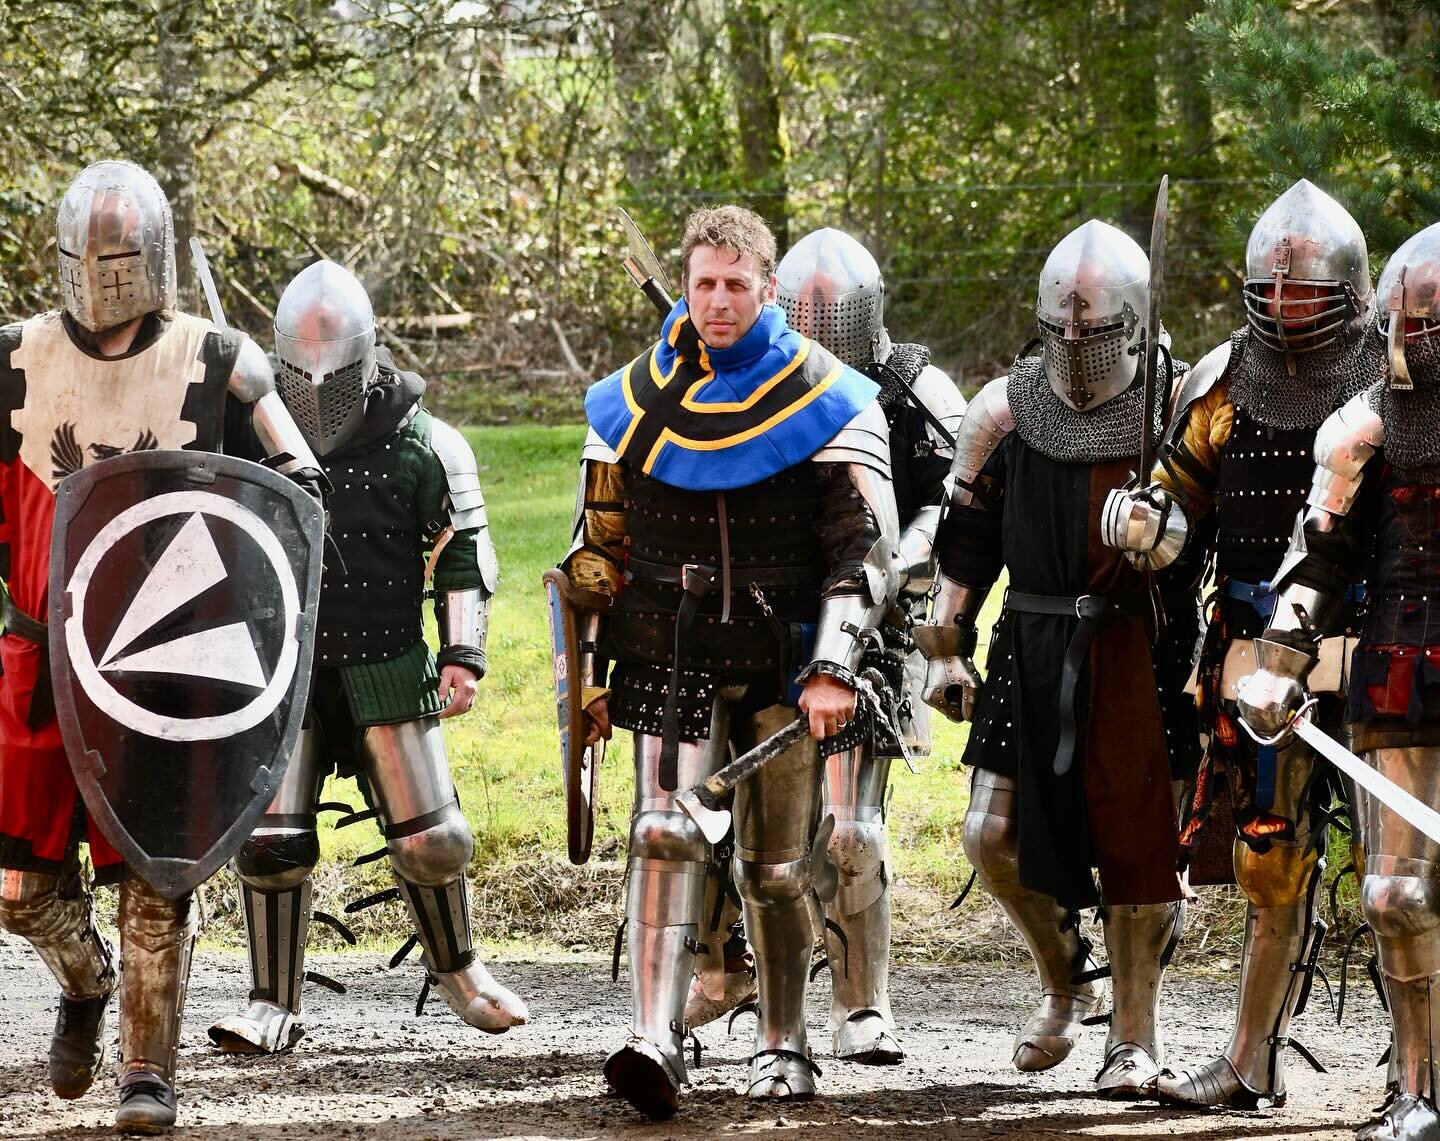 This summer we hope to bring an awesome mini Renaissance Fair to Forest Grove with the main act being live medieval combat with our friends @armoredcombatacademy 
.
Stay tuned for a unique beer collaberation announcement and the return of our Longstr